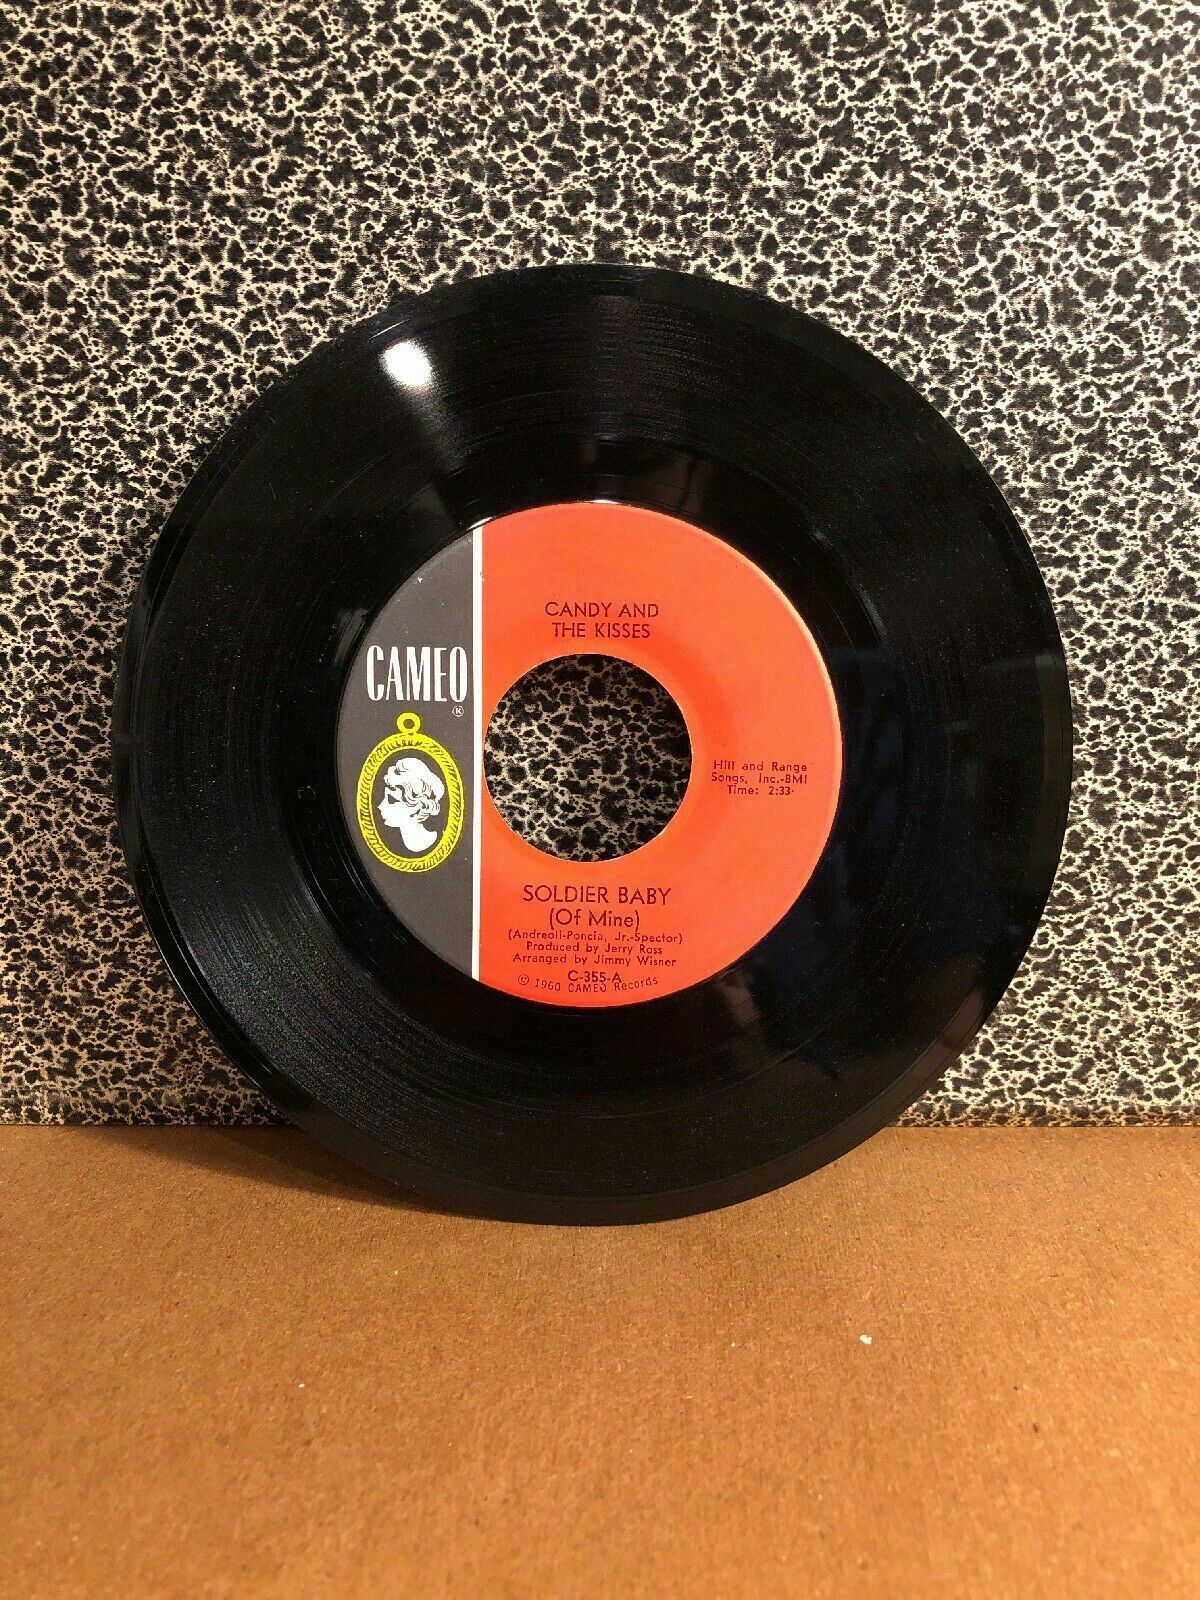 1960 CANDY AND THE KISSES 45RPM 7” Single Cameo Records ”Soldier Baby” (J59)